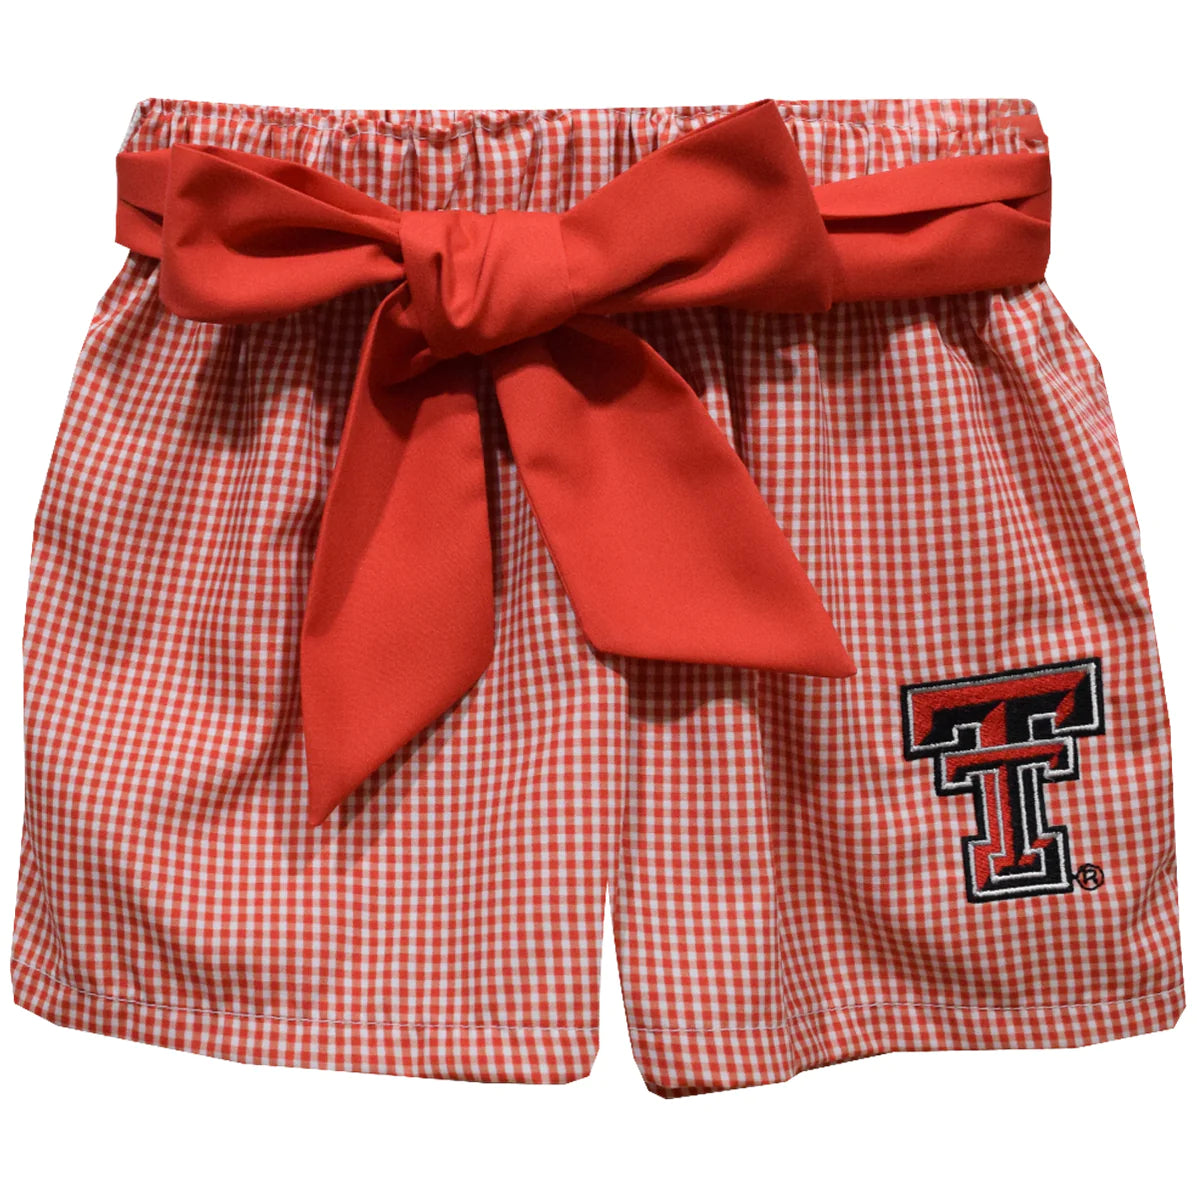 Texas Tech Red Gingham Shorts with Sash